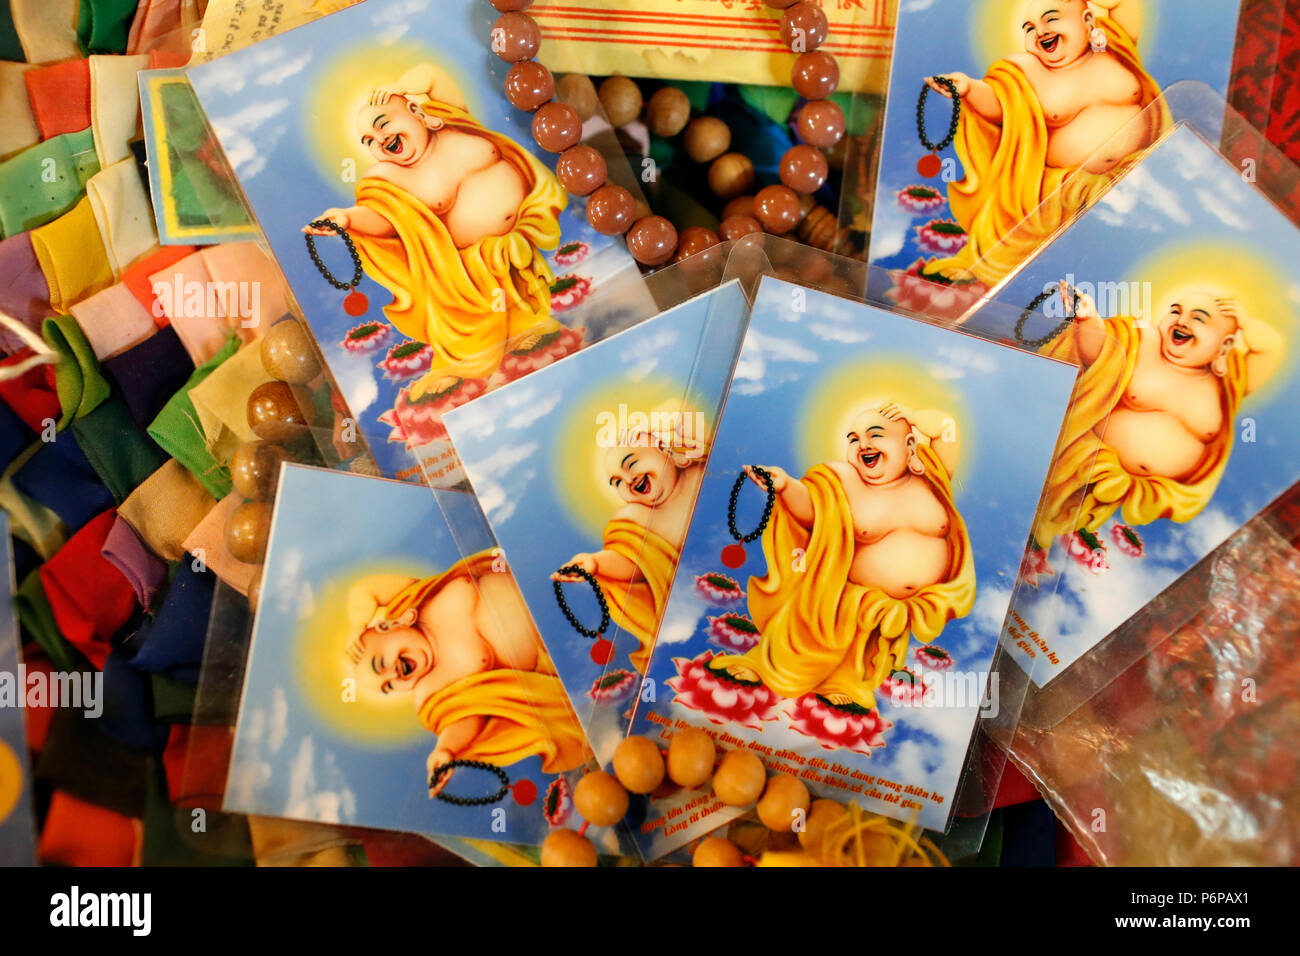 Laughing Buddha images for chinese New Year.  Saint-Pierre en Faucigny. France. Stock Photo